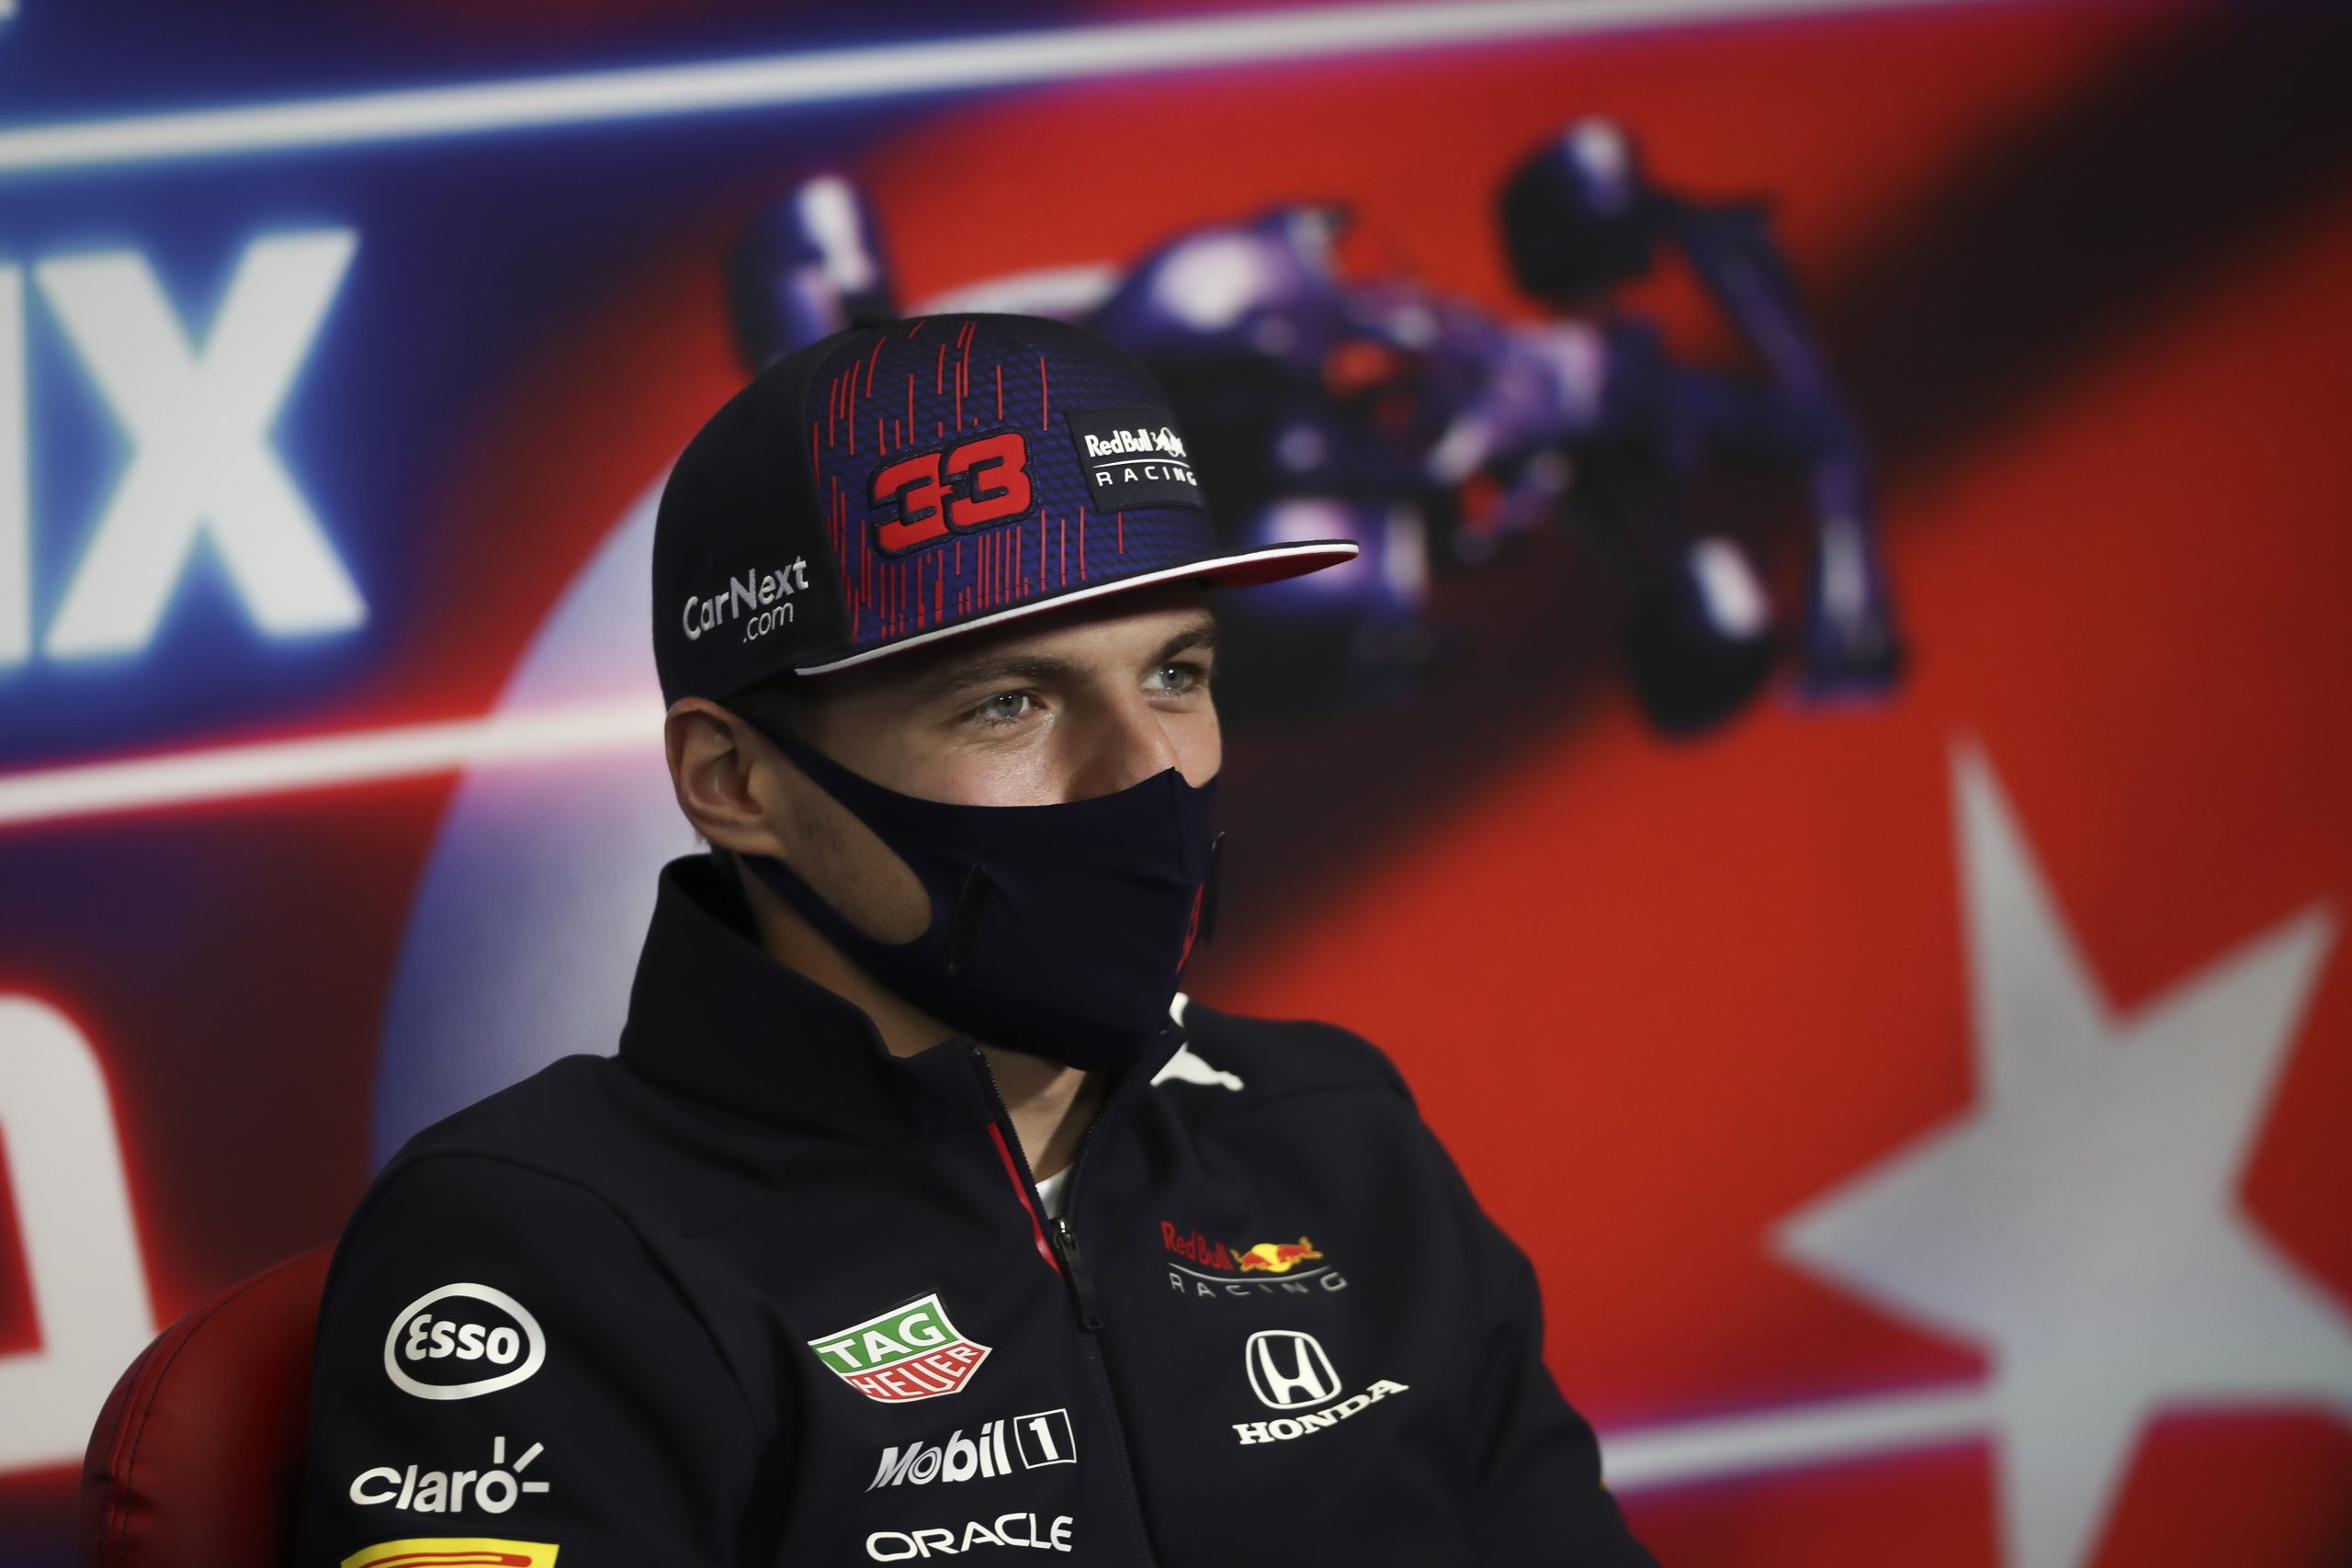 epa09510641 Dutch Formula One driver Max Verstappen of Red Bull Racing reacts during the press conference for the 2021 Formula One Grand Prix of Turkey at the Intercity Istanbul Park circuit in Istanbul, Turkey, 07 October 2021. The 2021 Formula One Grand Prix of Turkey will take place on 10 October.  EPA/Sedat Suna / POOL